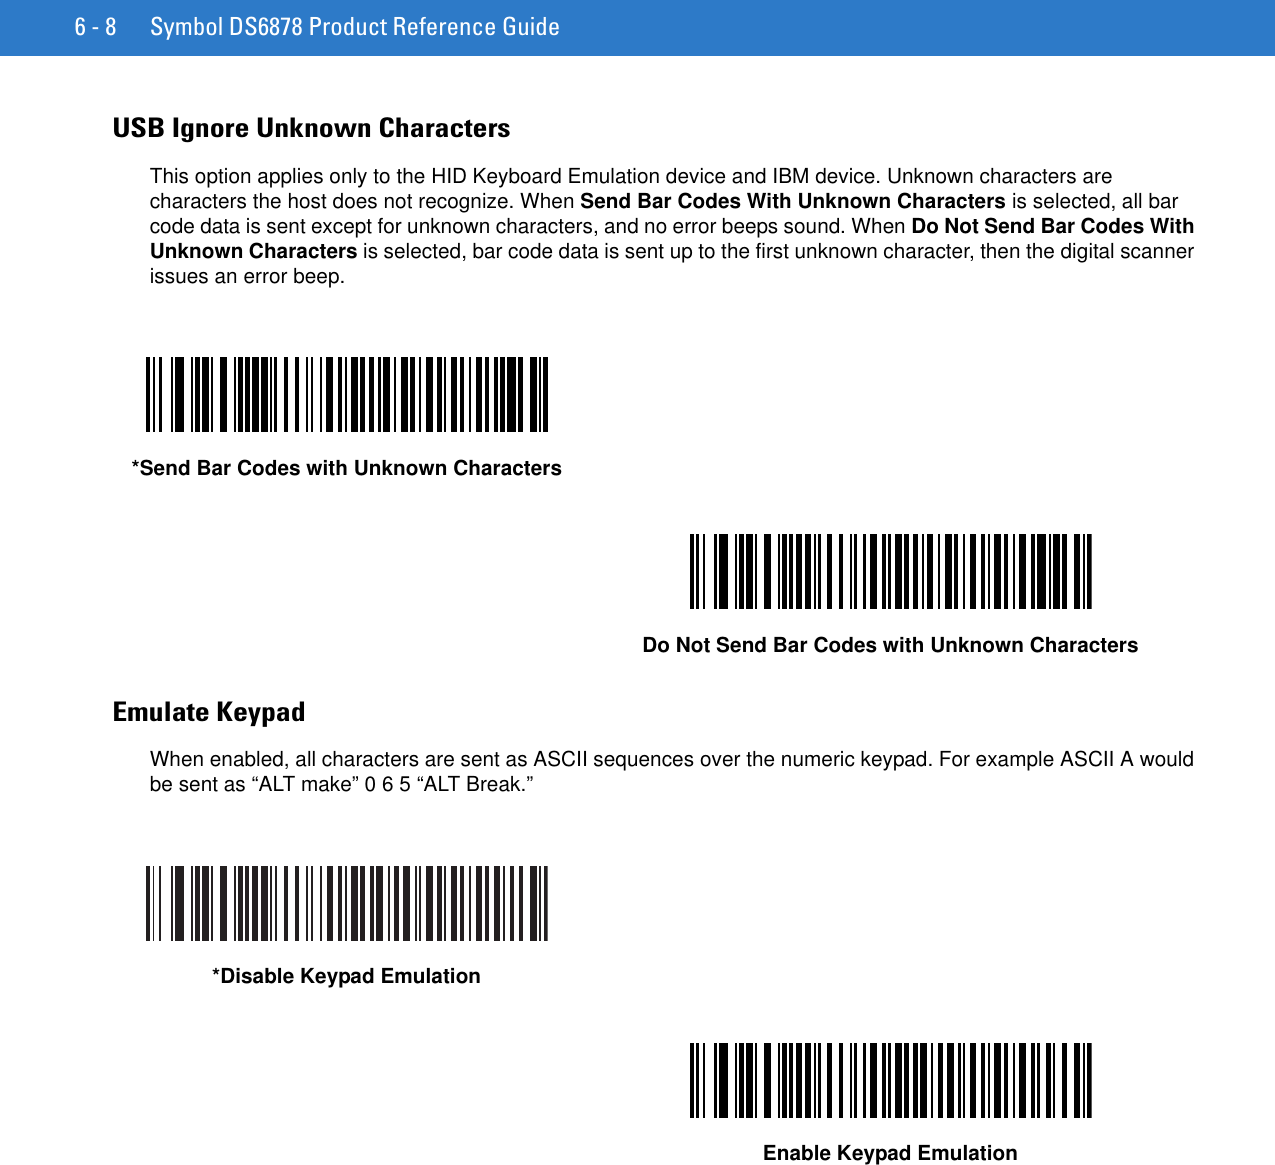 6 - 8 Symbol DS6878 Product Reference GuideUSB Ignore Unknown CharactersThis option applies only to the HID Keyboard Emulation device and IBM device. Unknown characters are characters the host does not recognize. When Send Bar Codes With Unknown Characters is selected, all bar code data is sent except for unknown characters, and no error beeps sound. When Do Not Send Bar Codes With Unknown Characters is selected, bar code data is sent up to the first unknown character, then the digital scanner issues an error beep.Emulate KeypadWhen enabled, all characters are sent as ASCII sequences over the numeric keypad. For example ASCII A would be sent as “ALT make” 0 6 5 “ALT Break.”*Send Bar Codes with Unknown CharactersDo Not Send Bar Codes with Unknown Characters*Disable Keypad EmulationEnable Keypad Emulation